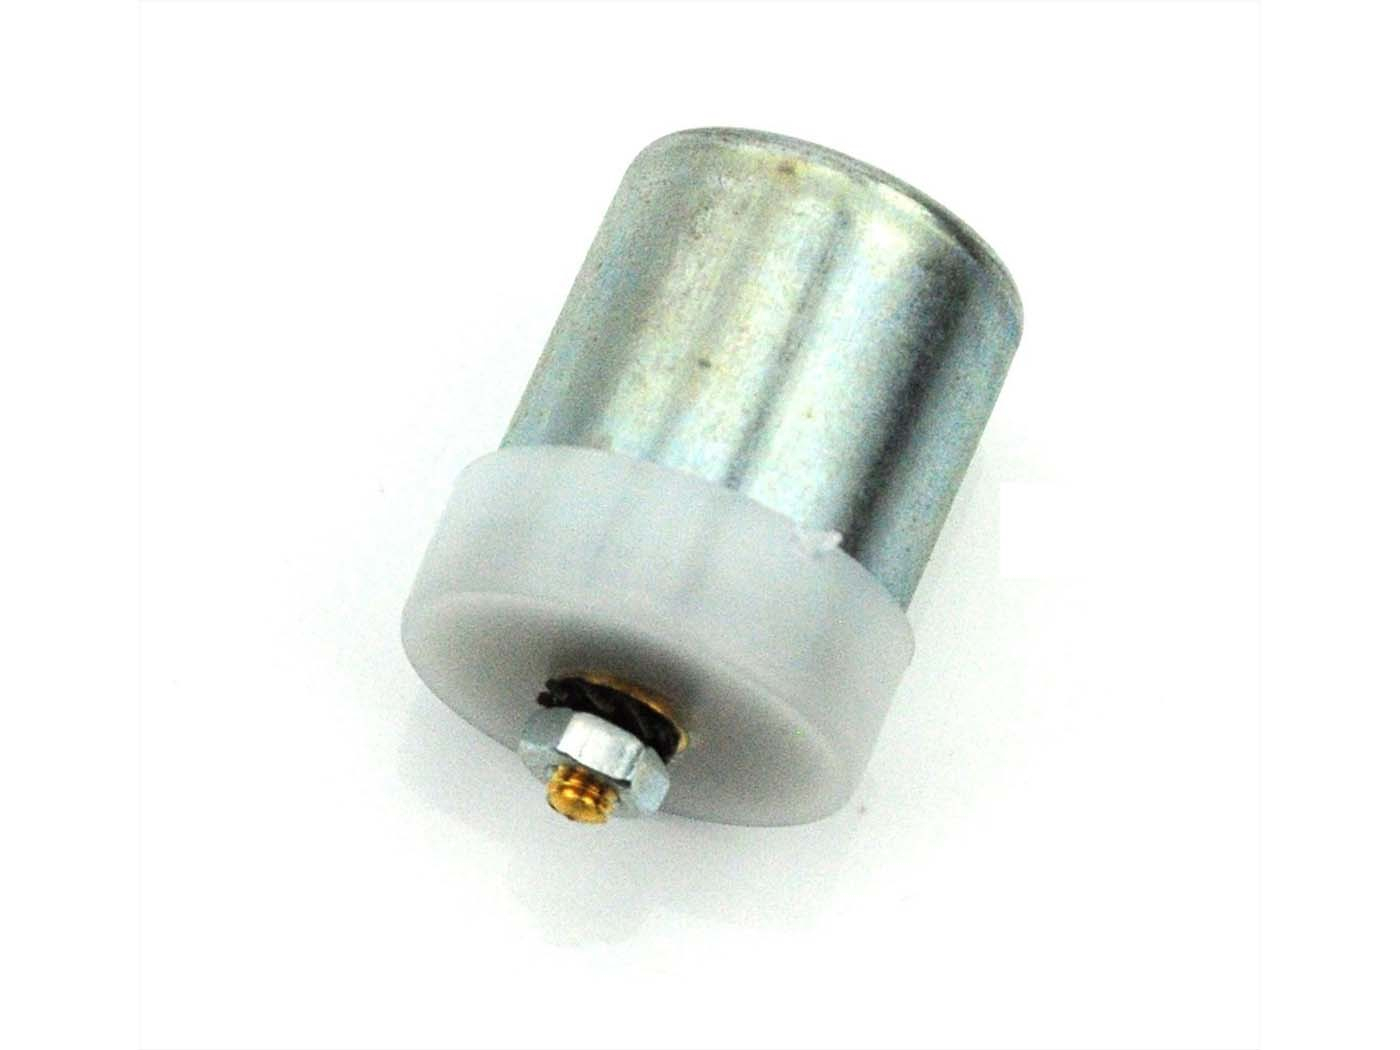 Ignition Capacitor EFFE For Screwing For Mokick Moped Moped Mokick